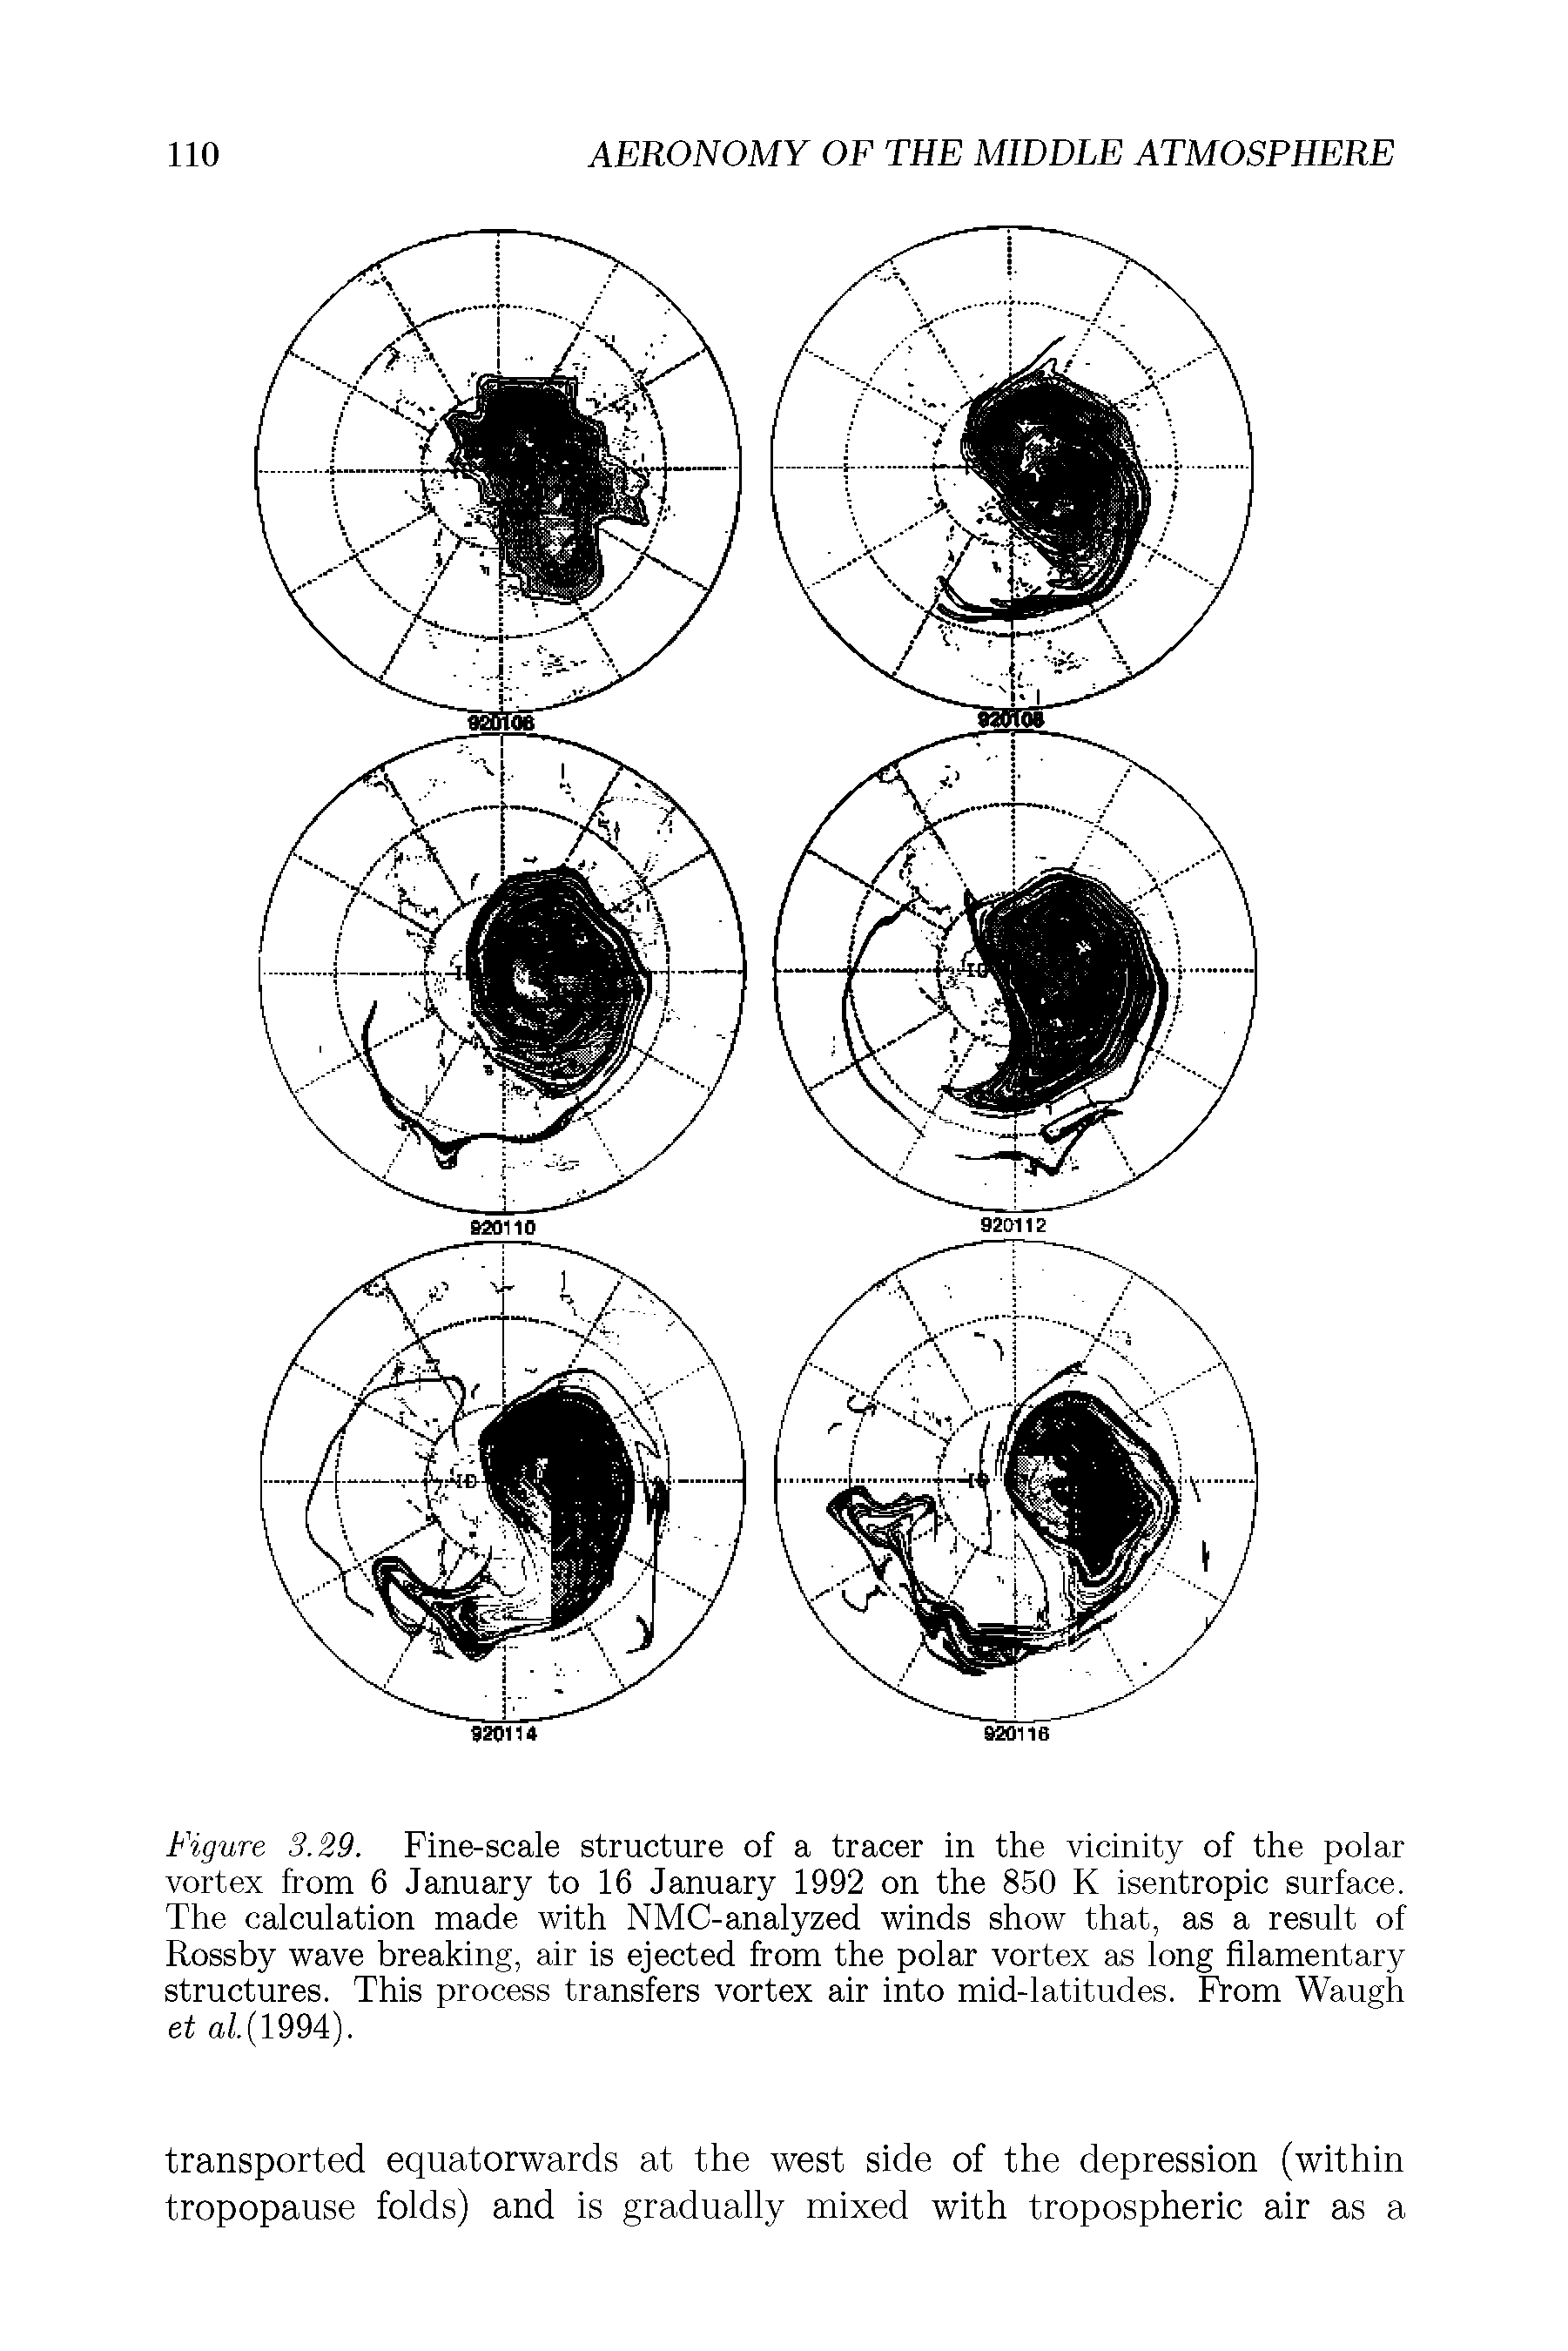 Figure 3.29. Fine-scale structure of a tracer in the vicinity of the polar vortex from 6 January to 16 January 1992 on the 850 K isentropic surface. The calculation made with NMC-analyzed winds show that, as a result of Rossby wave breaking, air is ejected from the polar vortex as long filamentary structures. This process transfers vortex air into mid-latitudes. From Waugh et al.( 1994).